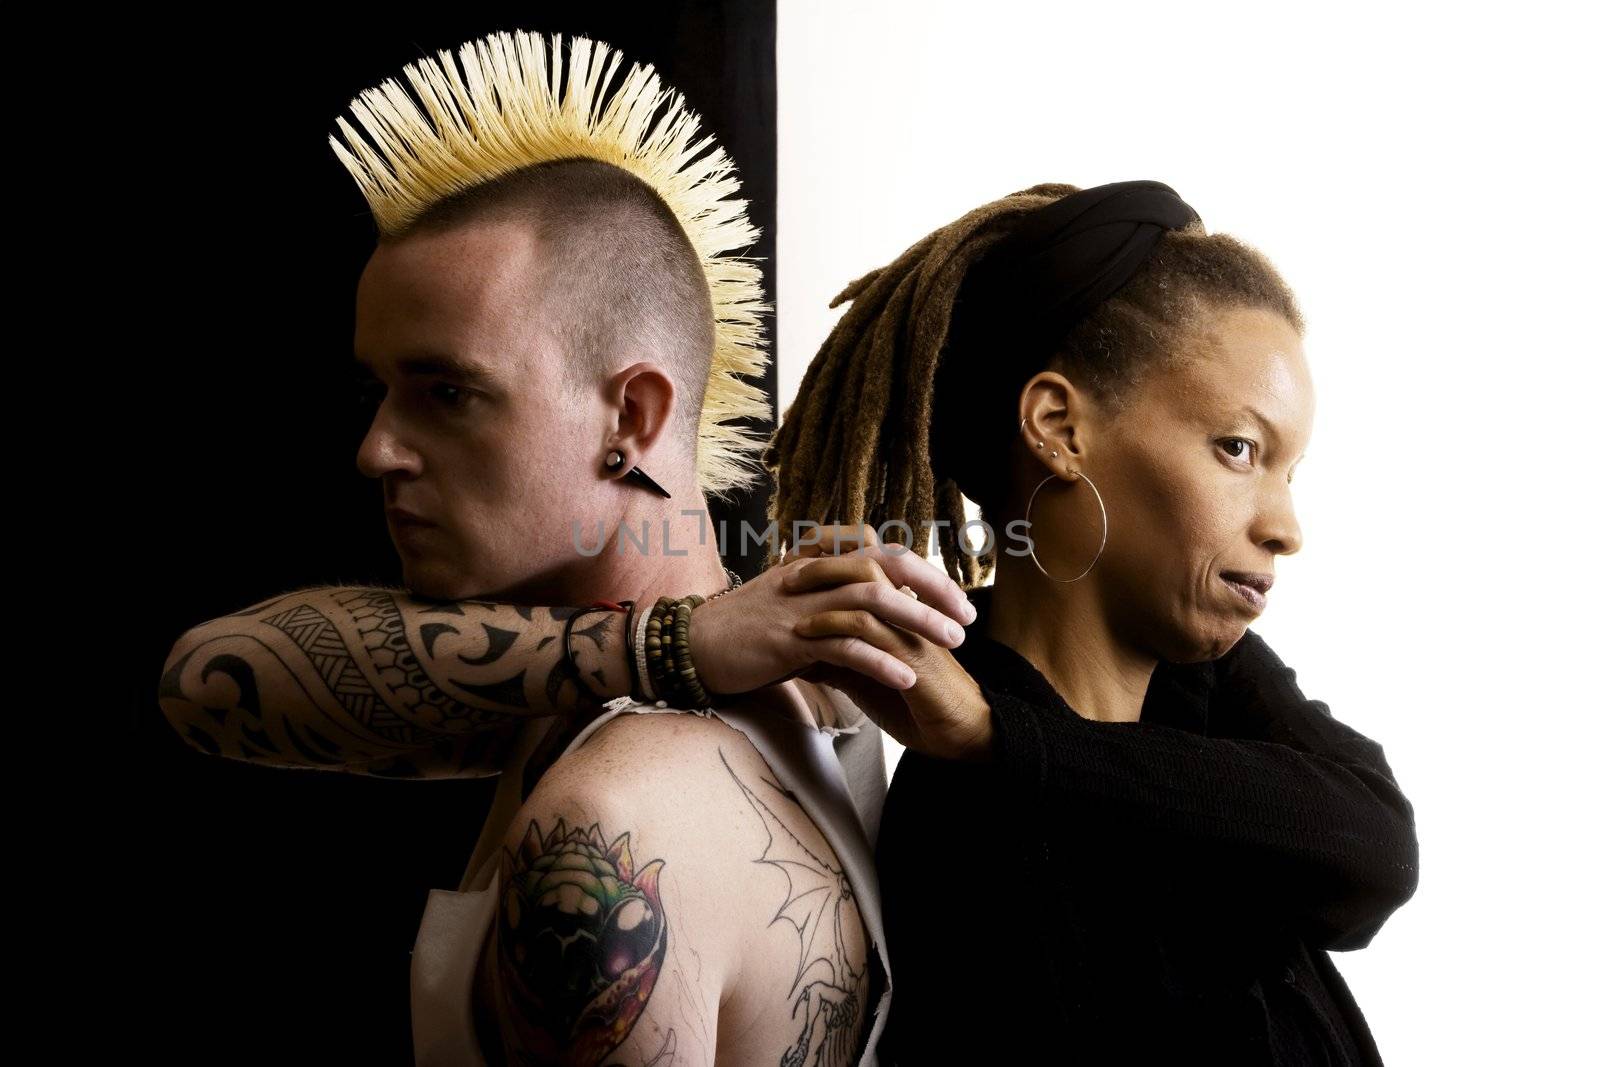 Man with Mohawk and Woman with Dreadlocks by Creatista